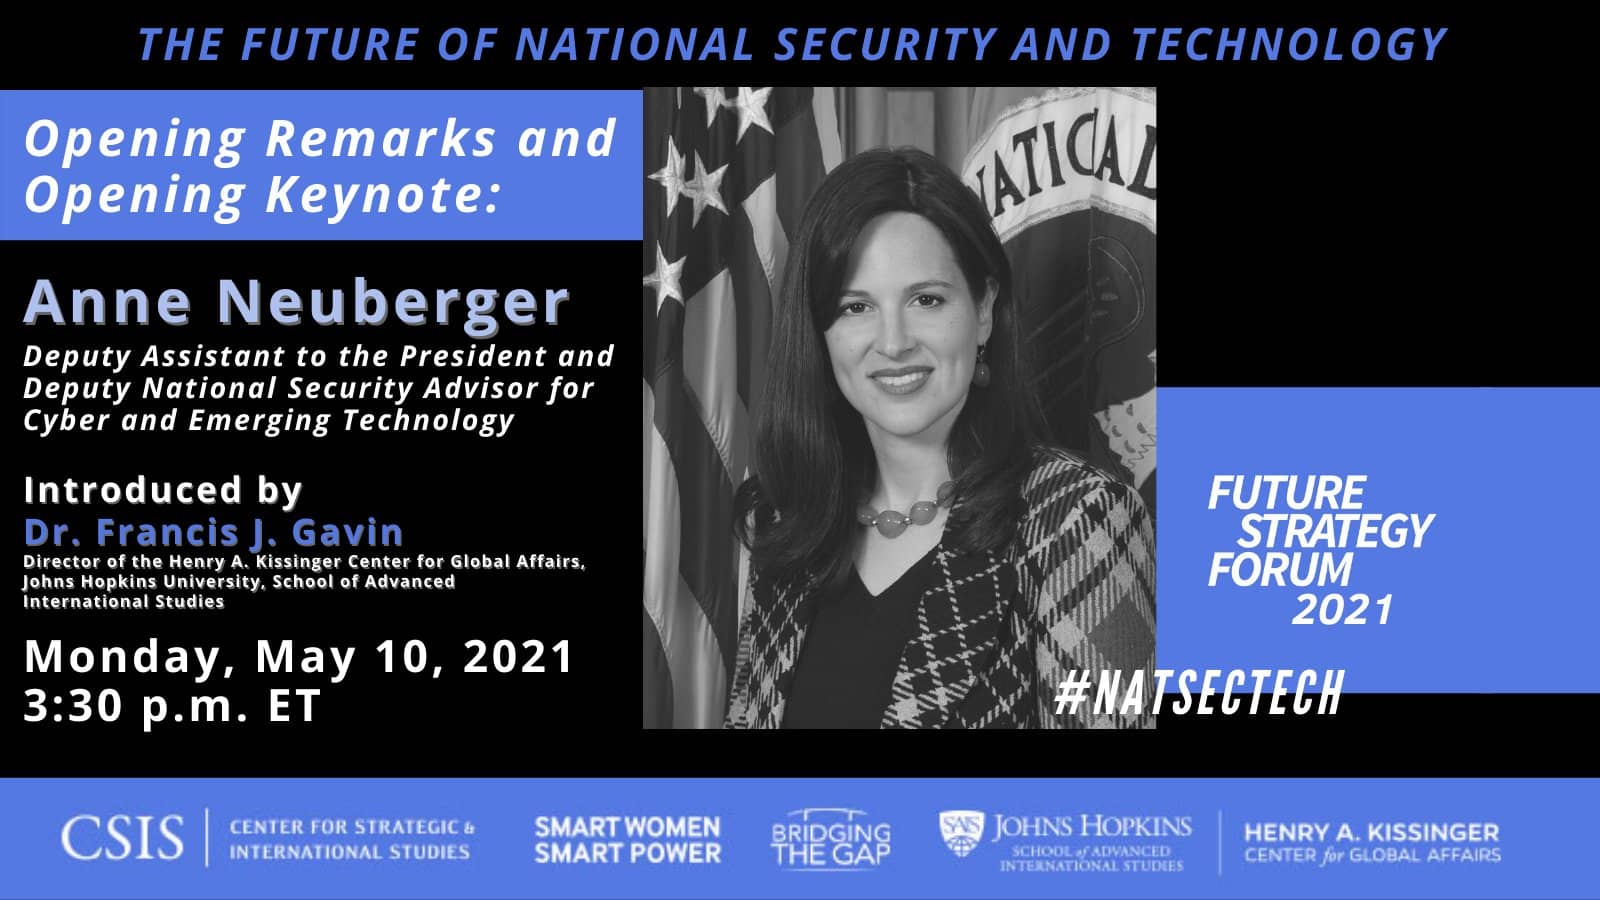 The Future of National Security and Technology, Opening Remarks and Opening Keynote: Anne Neuberger, Deputy Assistant to the President and Deputy National Security Advisor for Cyber and Emerging Technology, Introduced by Dr. Francis J. Gavin, Director of the Henry A. Kissinger Center for Global Affairs, Johns Hopkins University, School of Advanced International Studies, Monday, May 10, 2021, 3:30 p.m. ET, #NATSECTECH. (Sponsors:) Center for Strategic and International Studies; Smart Women, Smart Power; Bridging the Gap; Johns Hopkins University School of Advanced International Studies, Henry A. Kissinger Center for Global Affairs